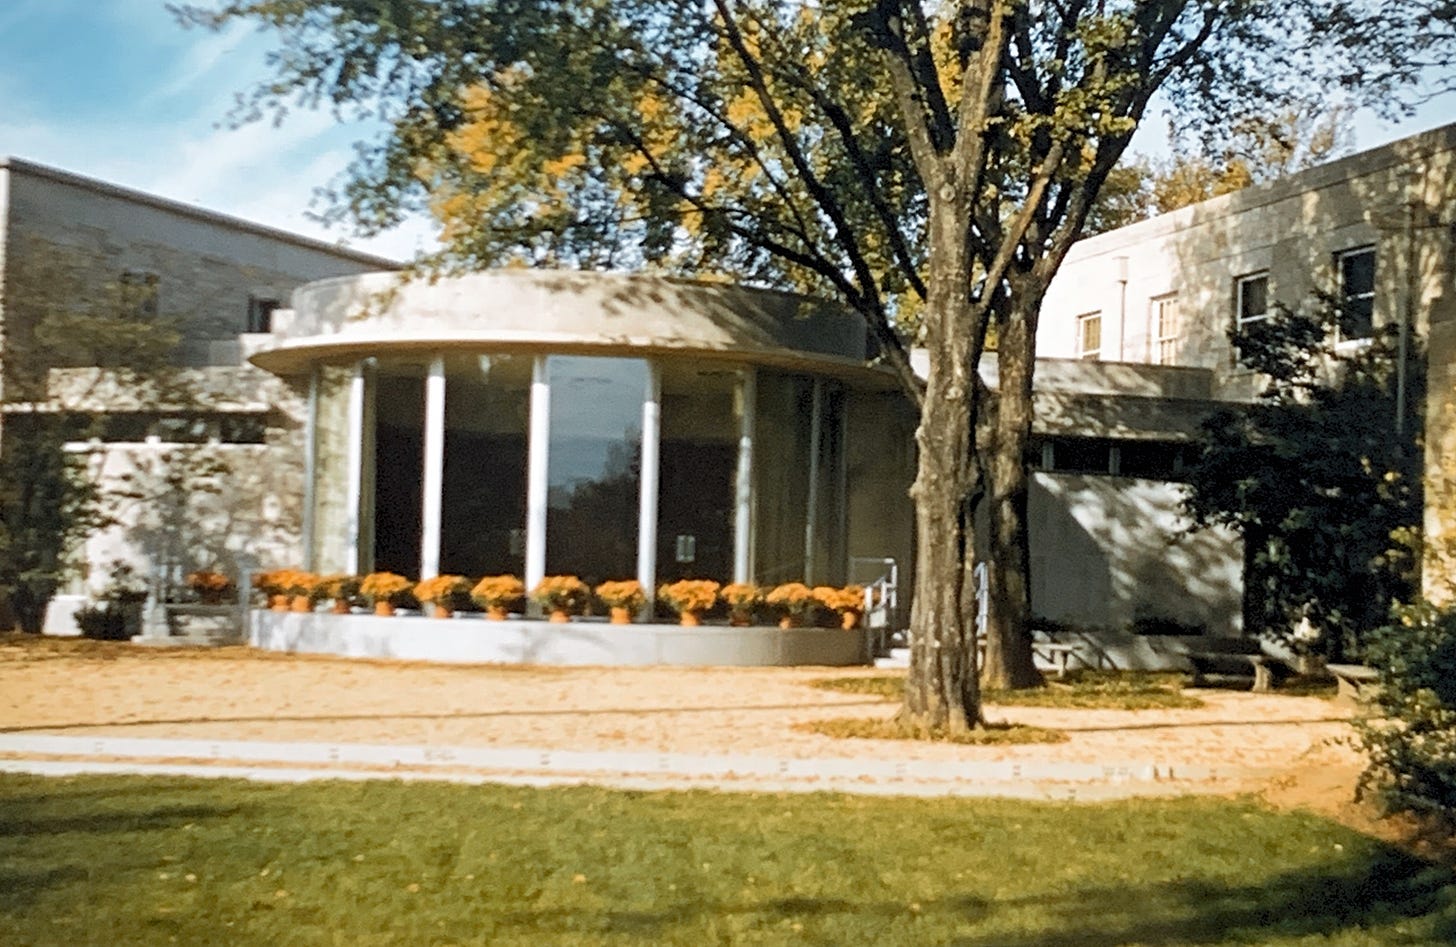 Photo showing a circular room with glass windows along the outside, with planters of mums on the ledge outside surrounding it.